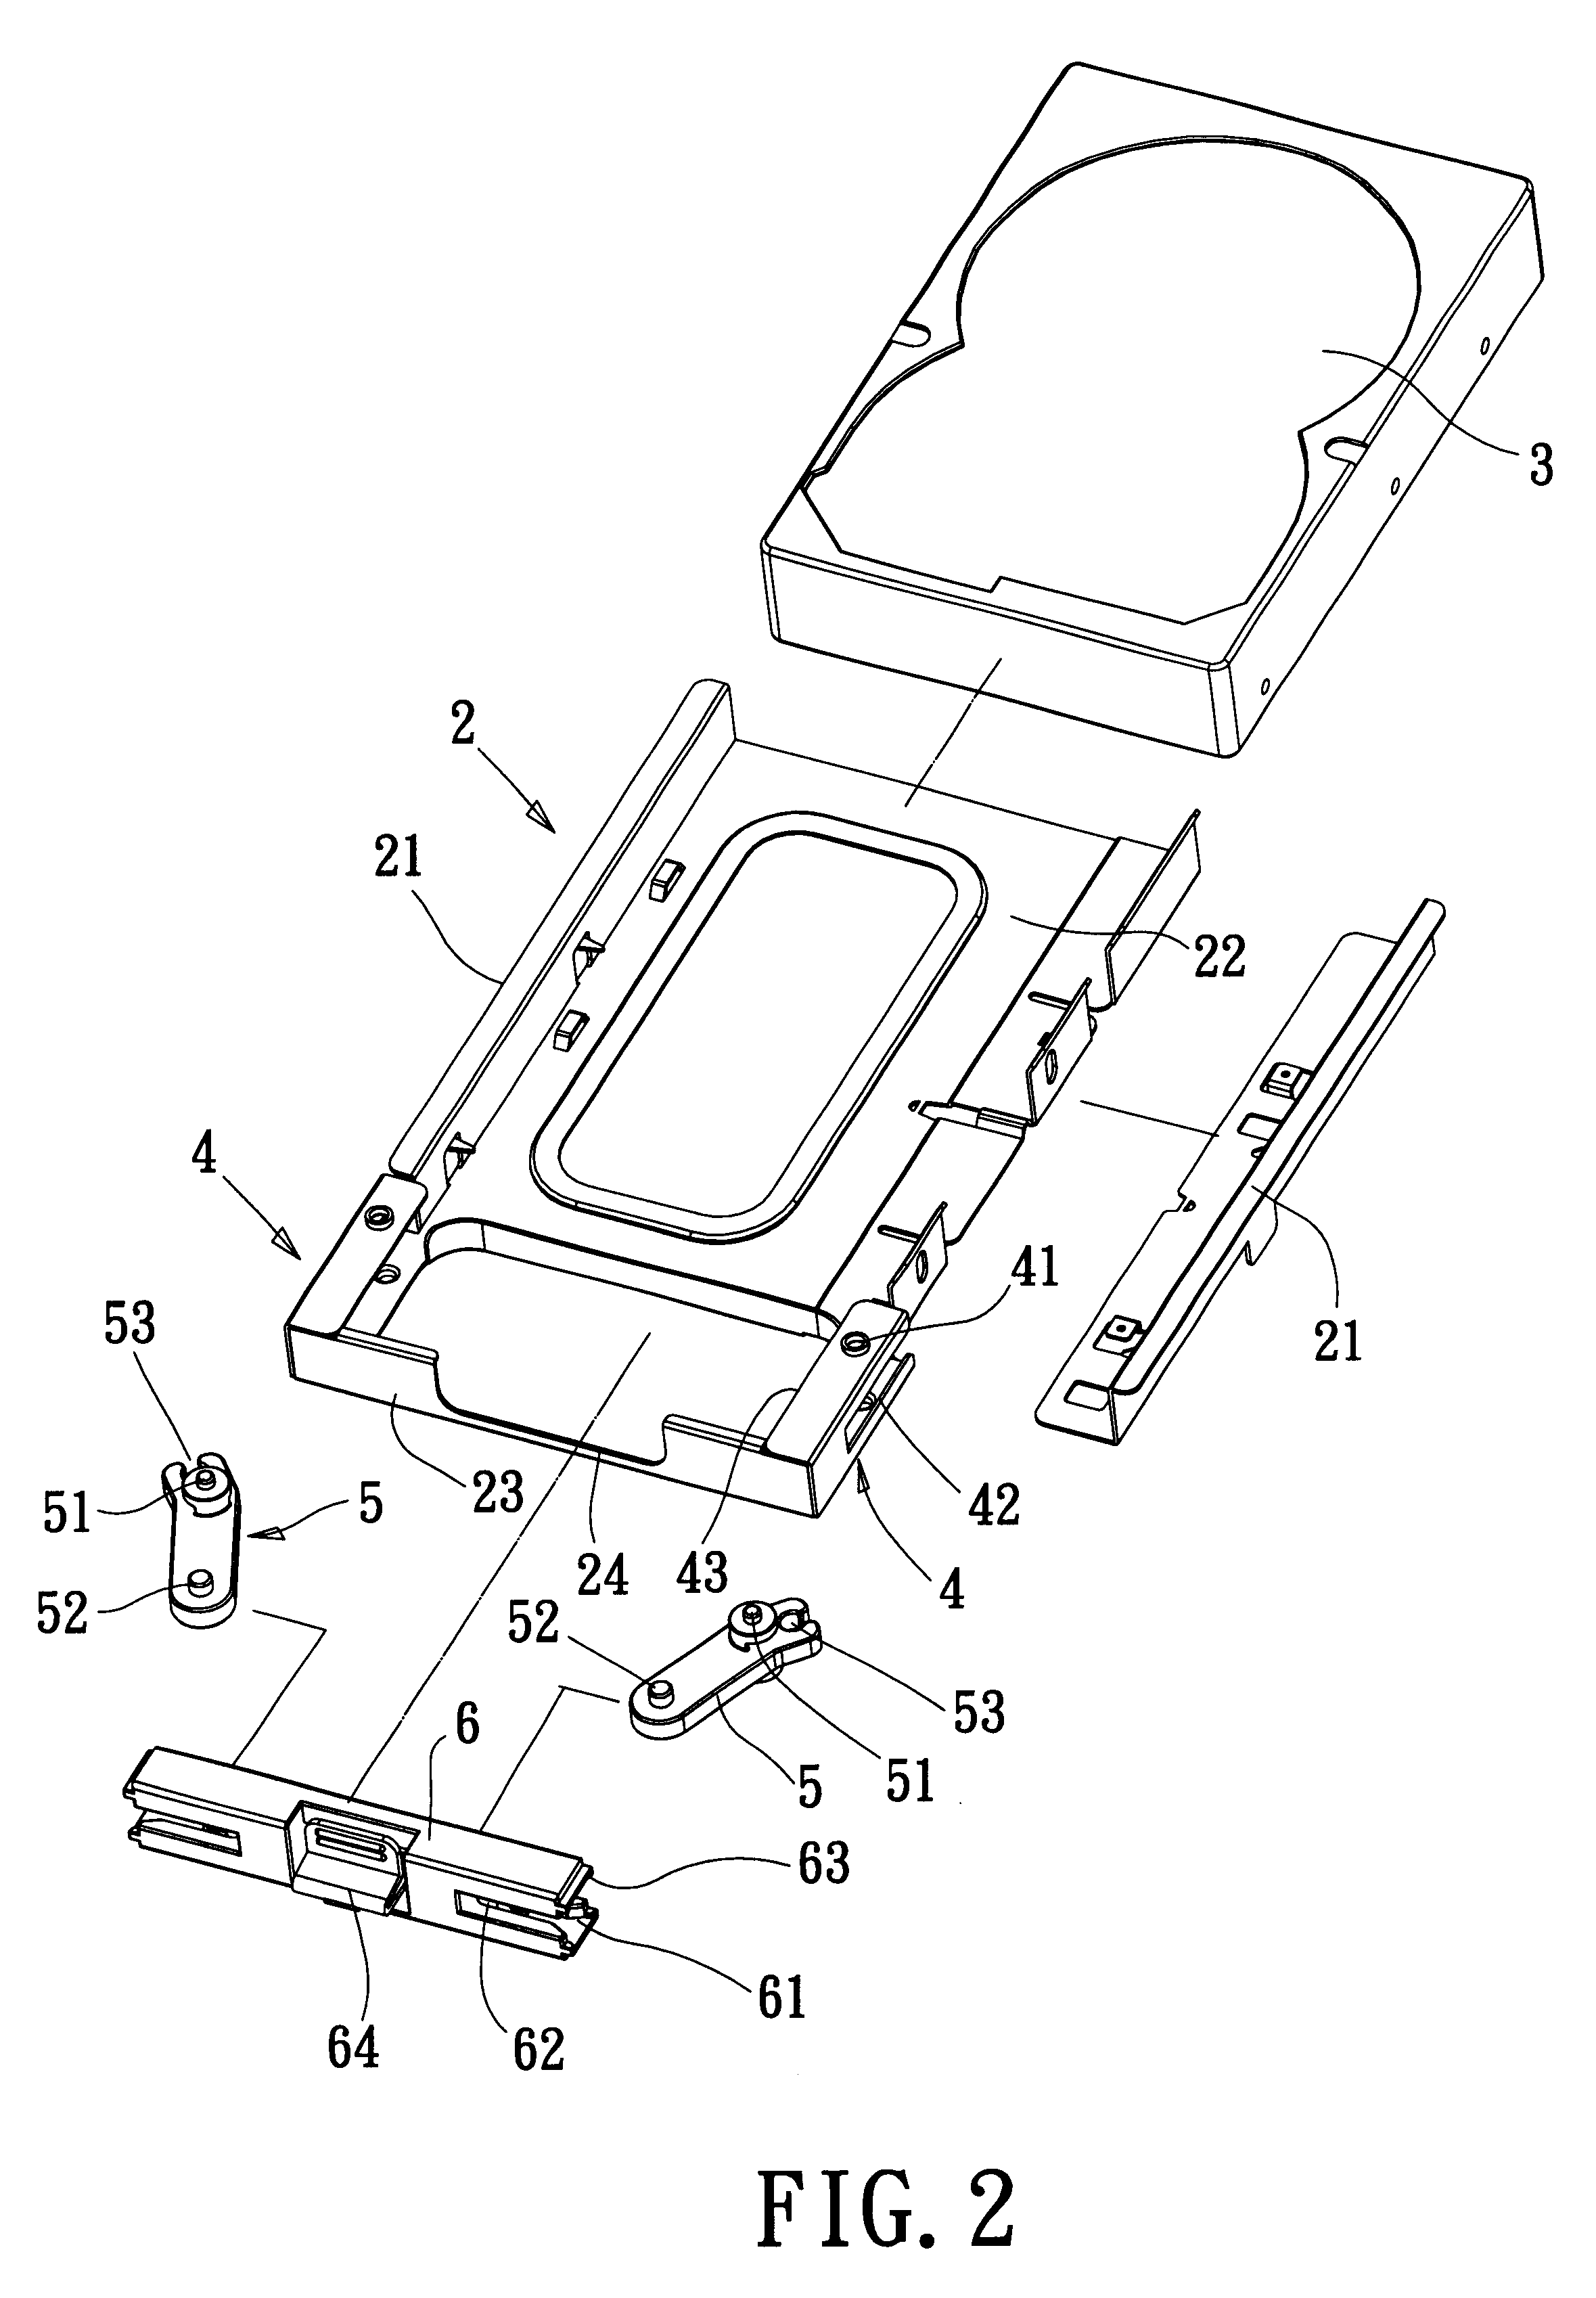 Extracting and positioning structure for hard disk drive